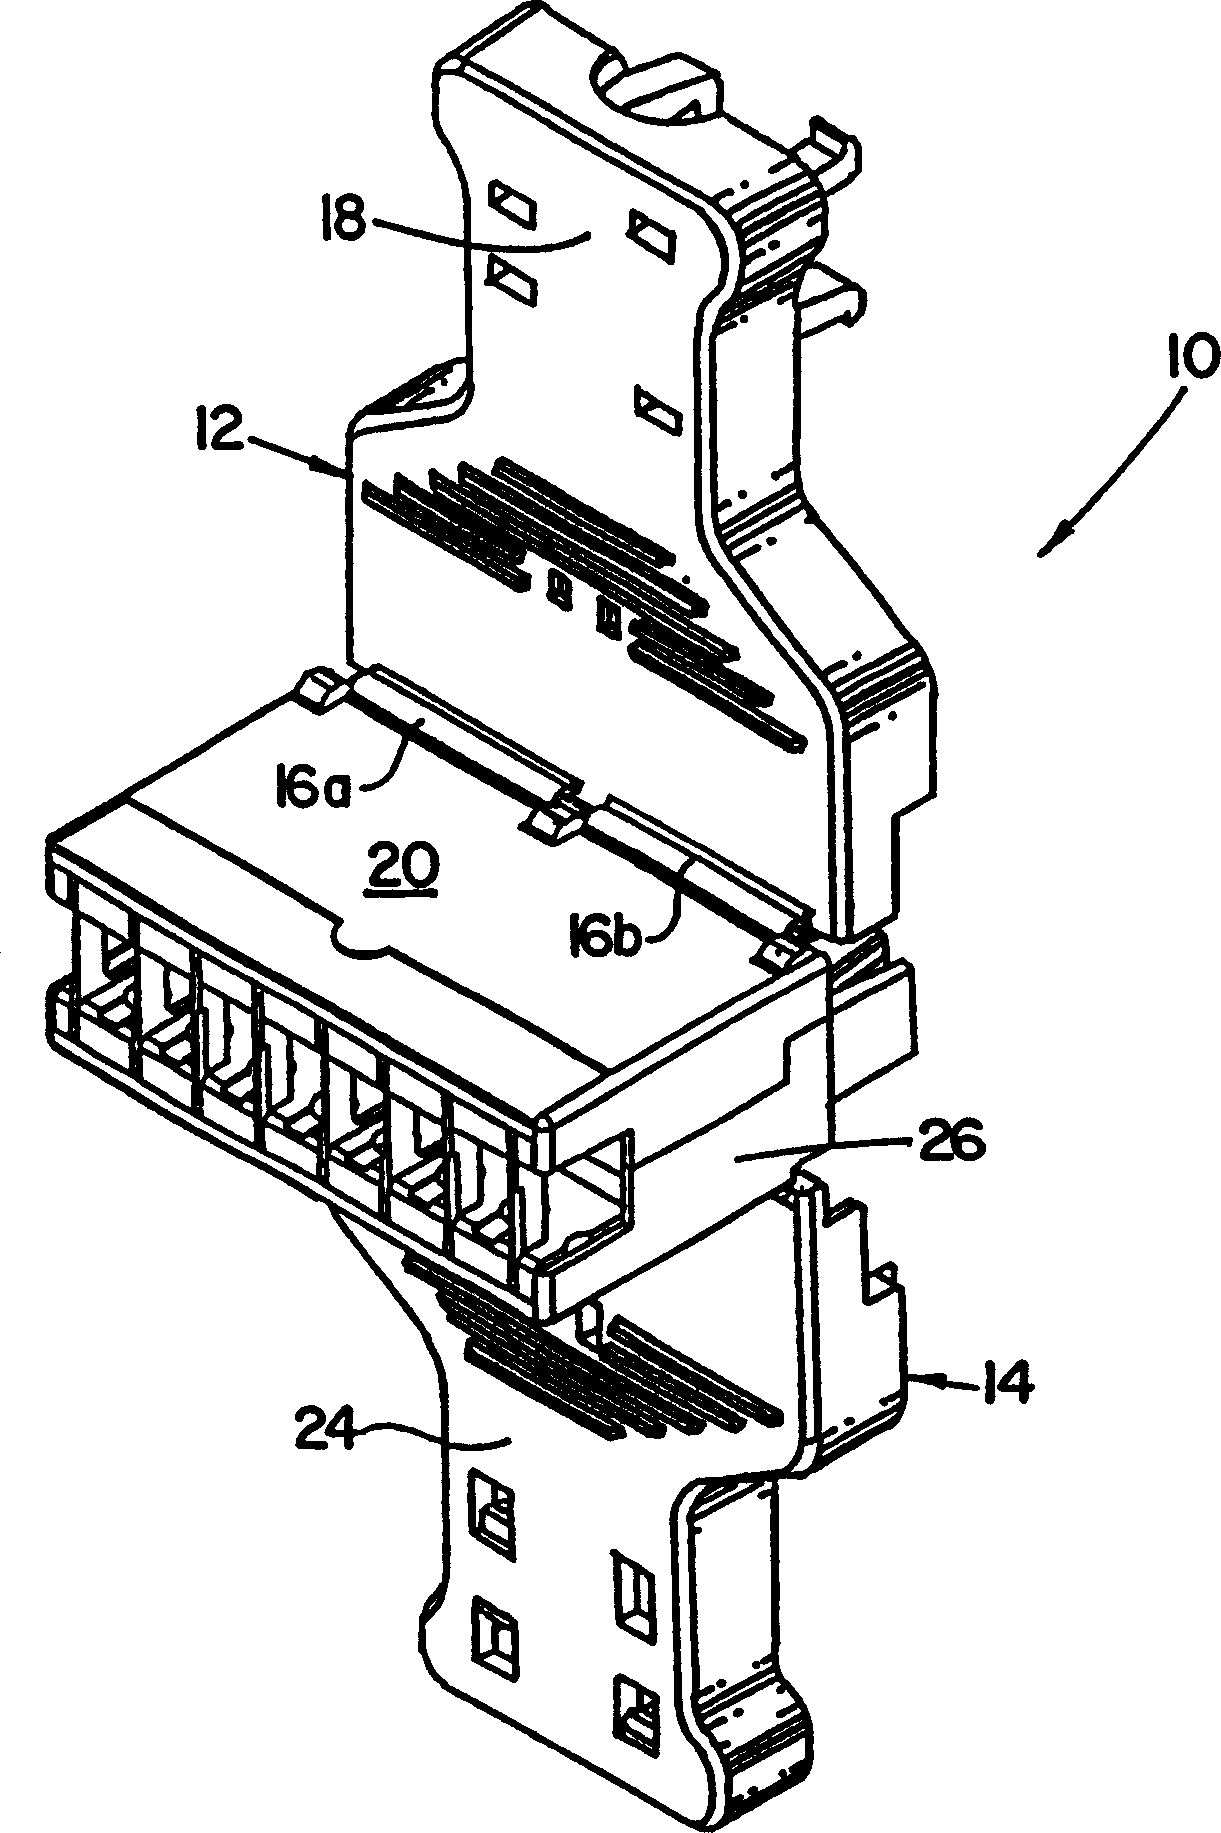 Patch plug design and methods for use thereof